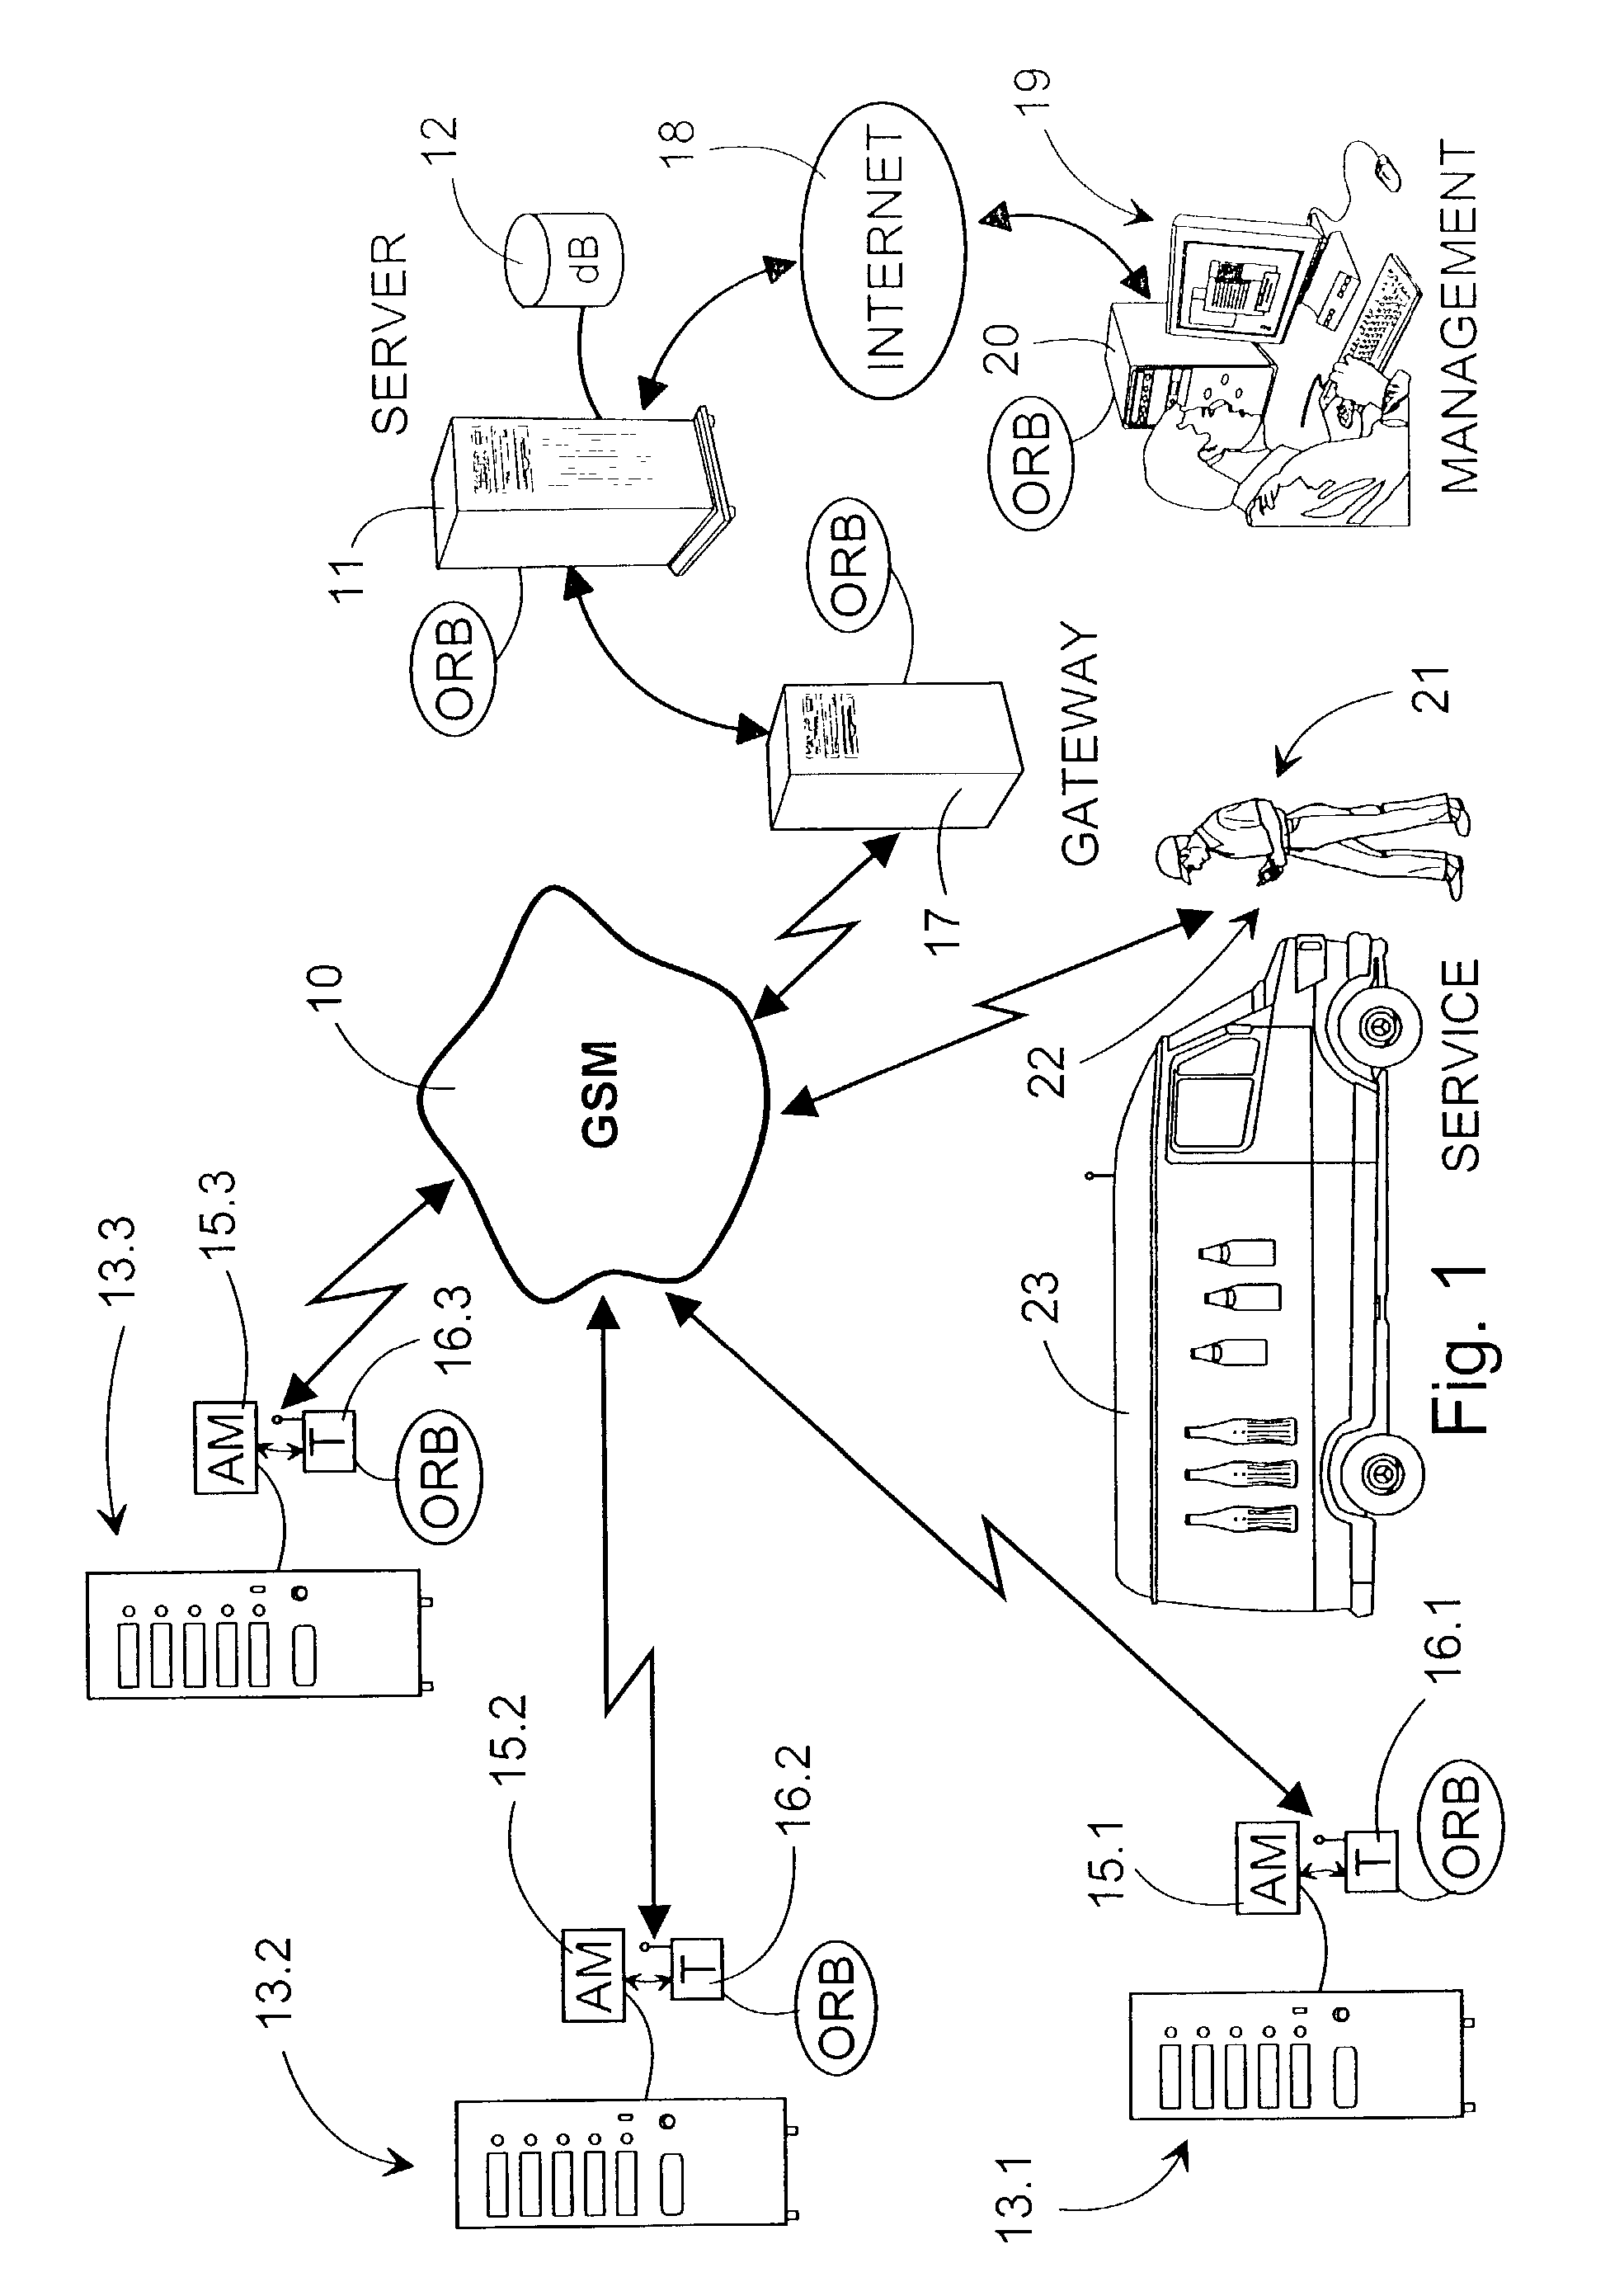 Method in an embedded environment for arranging functionality of a remote device